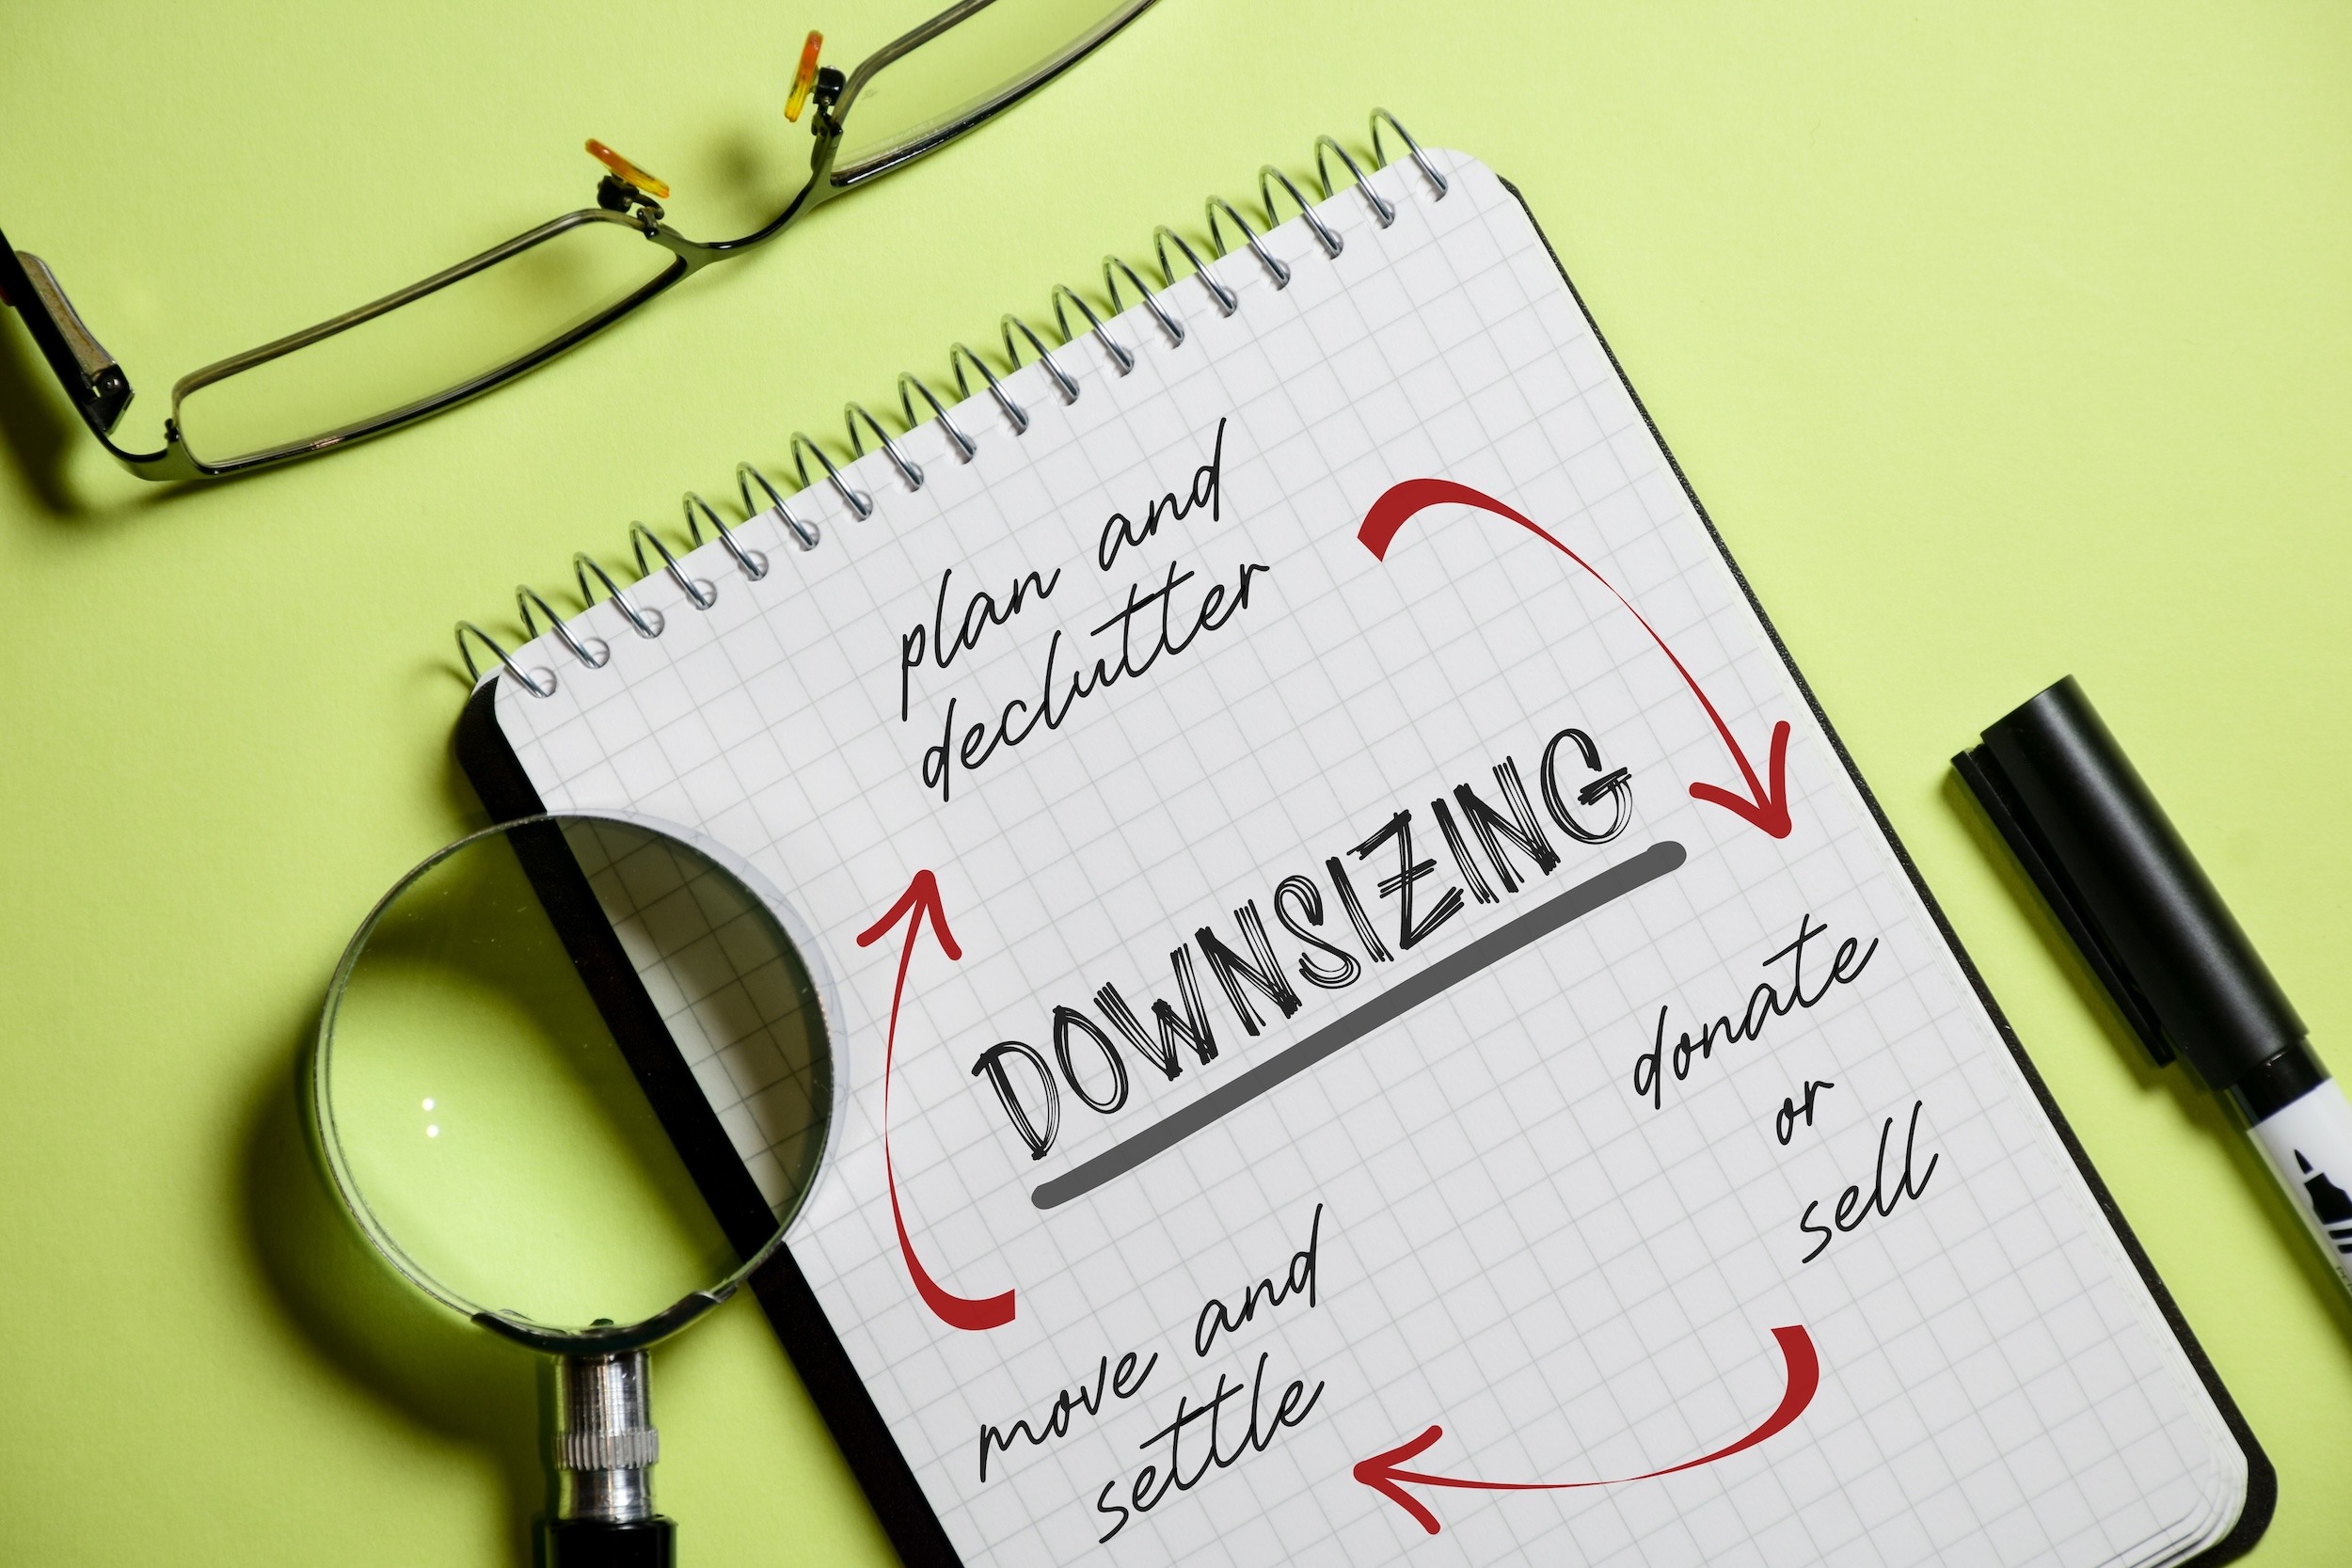 Home Downsizing. An image of a pair of glasses, magnifying glass and a pen on top of a notebook. The notebook having an diagram on it about downsizing and belongings… Declutter, Donate/Sell and Move and Settle.